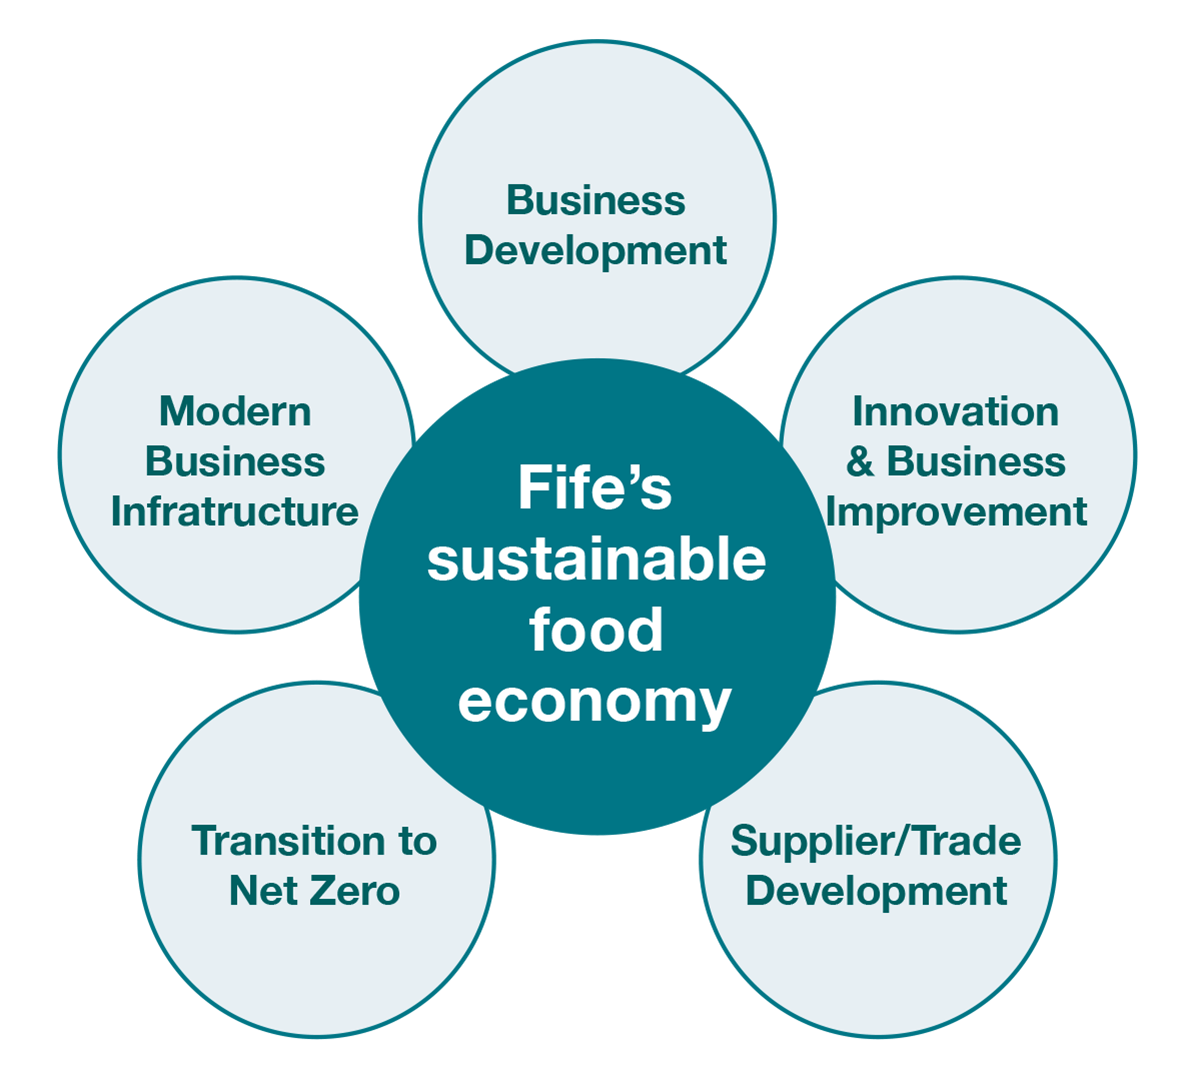 Fife's stainable food economy diagram containing business development, innovation and business improvement, supplier/trade development, transition to net zero and modern business infrastructure